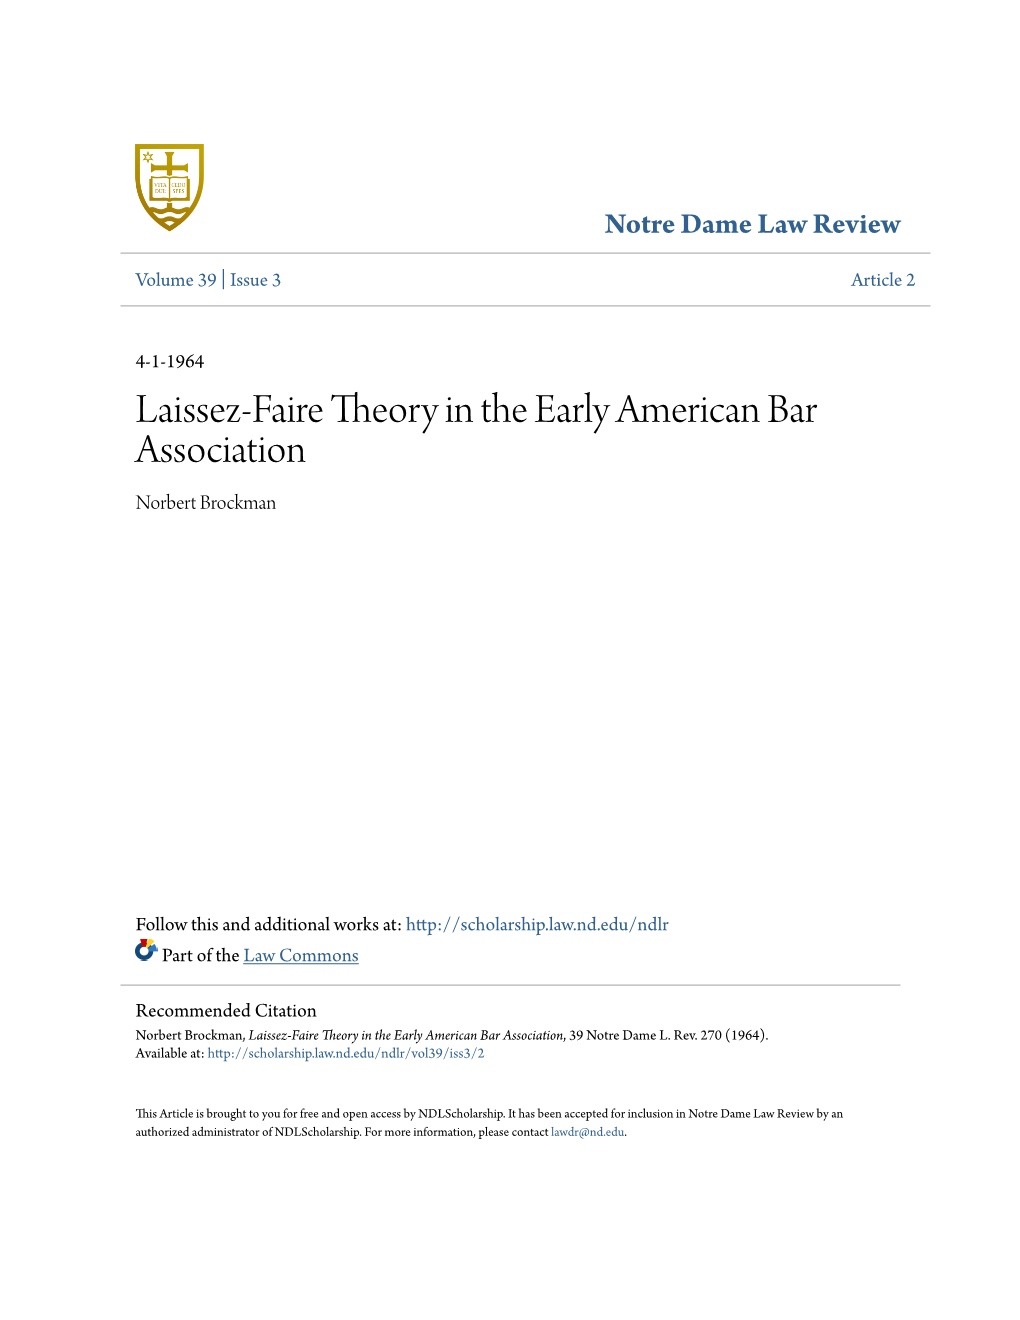 Laissez-Faire Theory in the Early American Bar Association Norbert Brockman